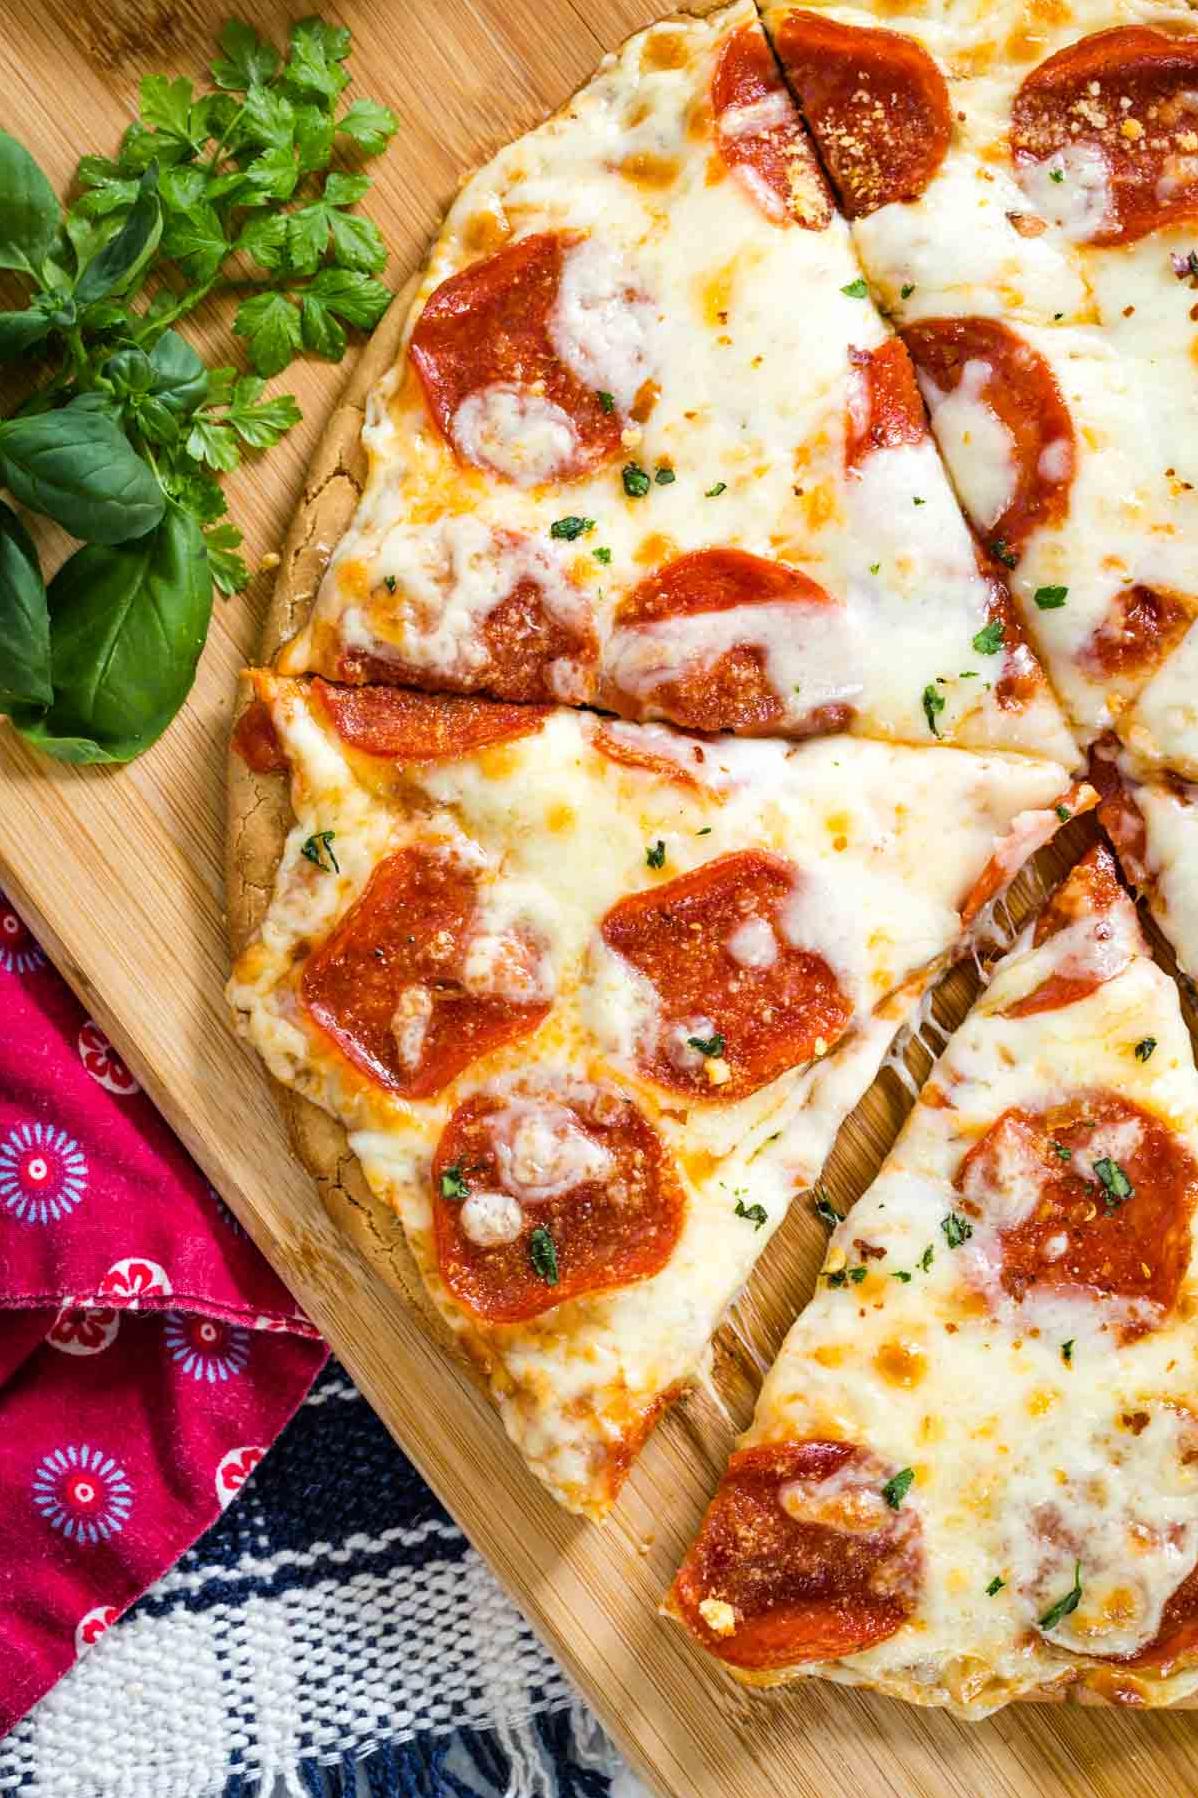  Satisfy your pizza cravings with this gluten-free twist on a classic favorite.